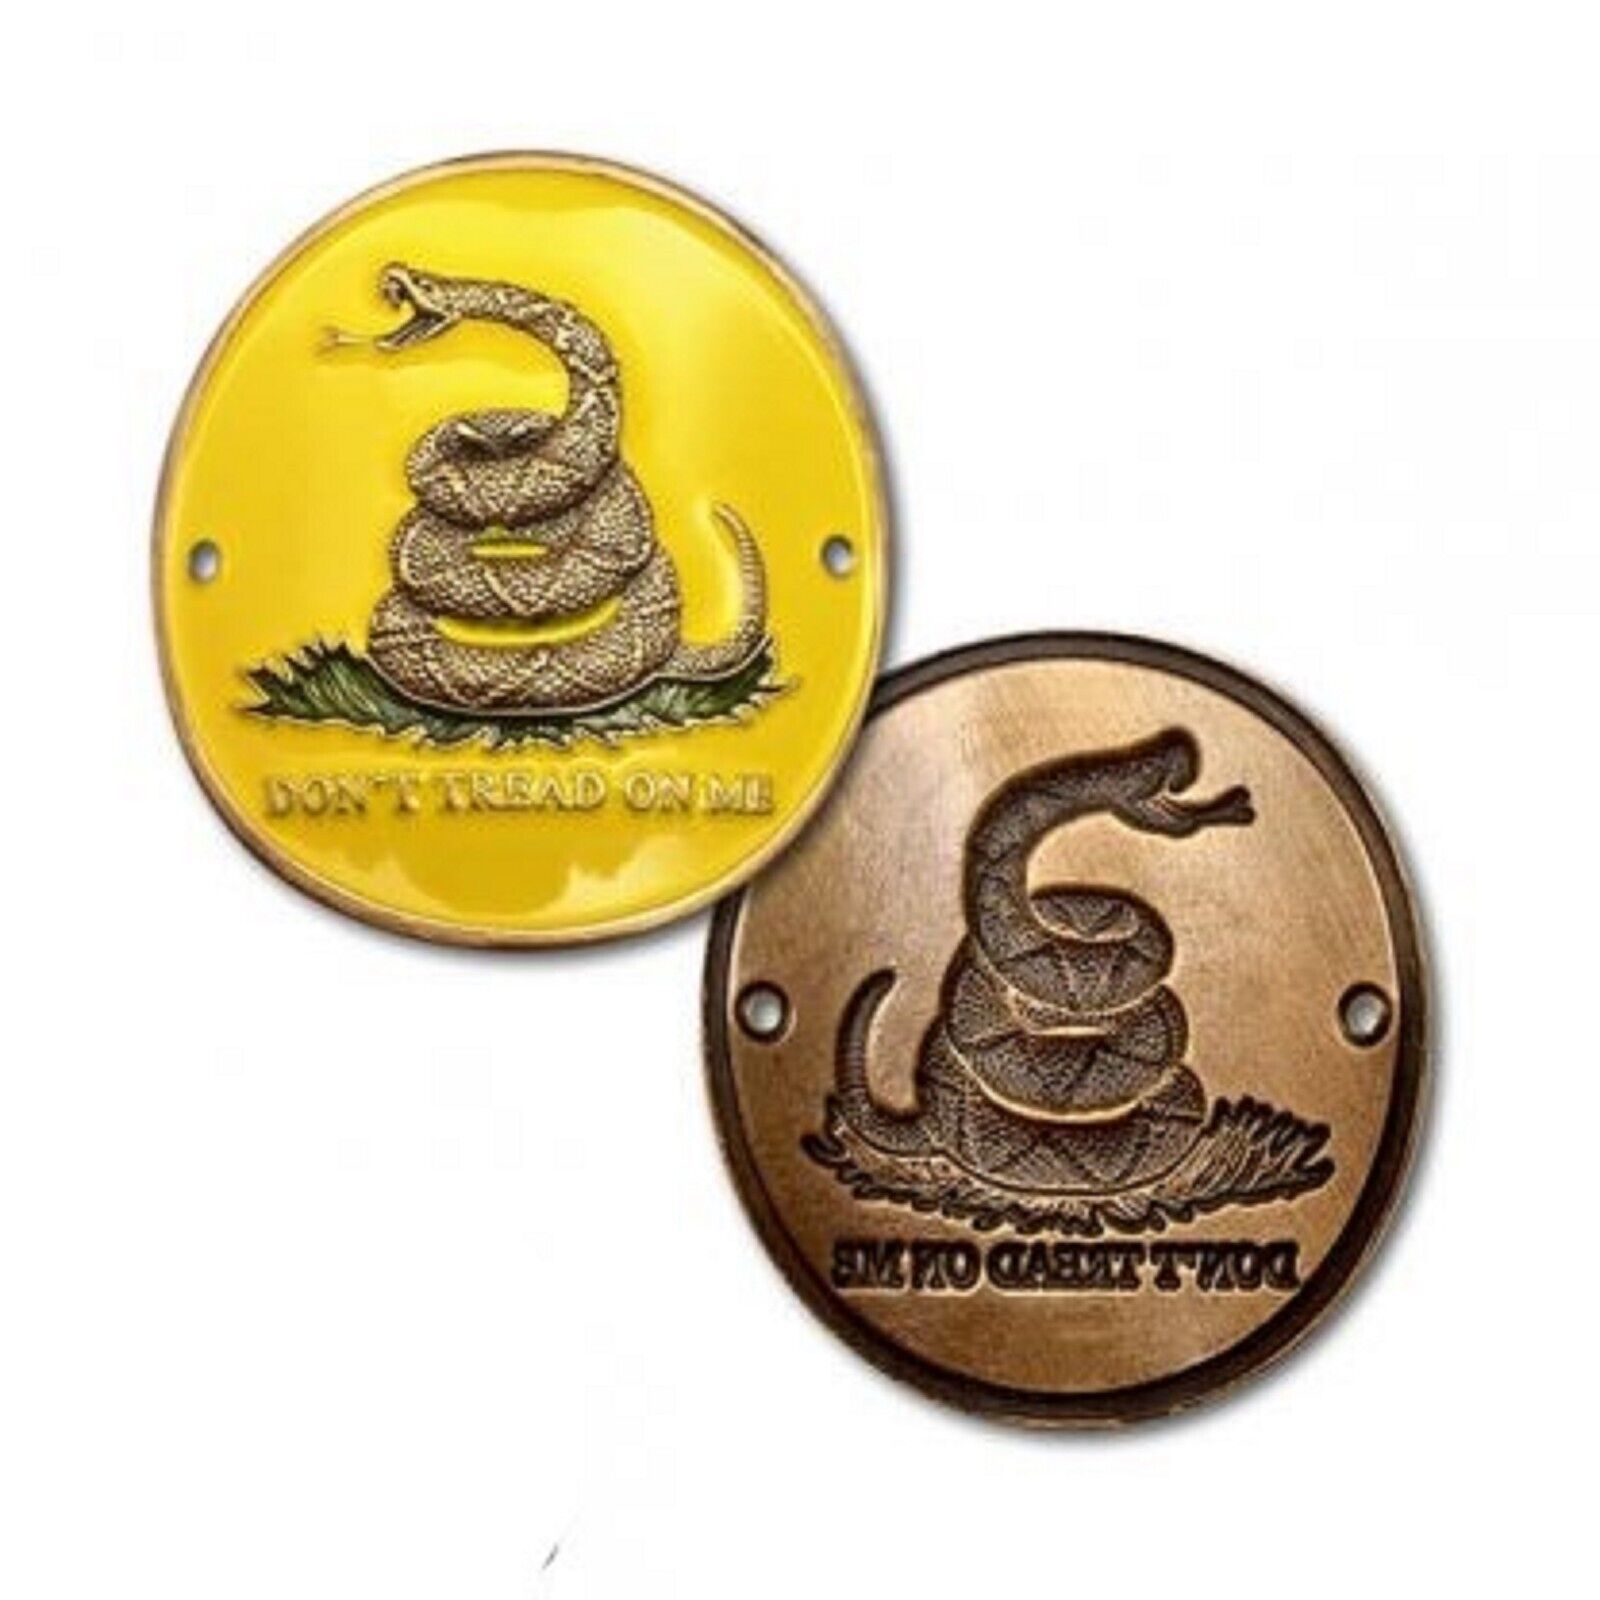 DON'T TREAD ON ME HIKING STICK MEDALLION CHALLENGE COIN